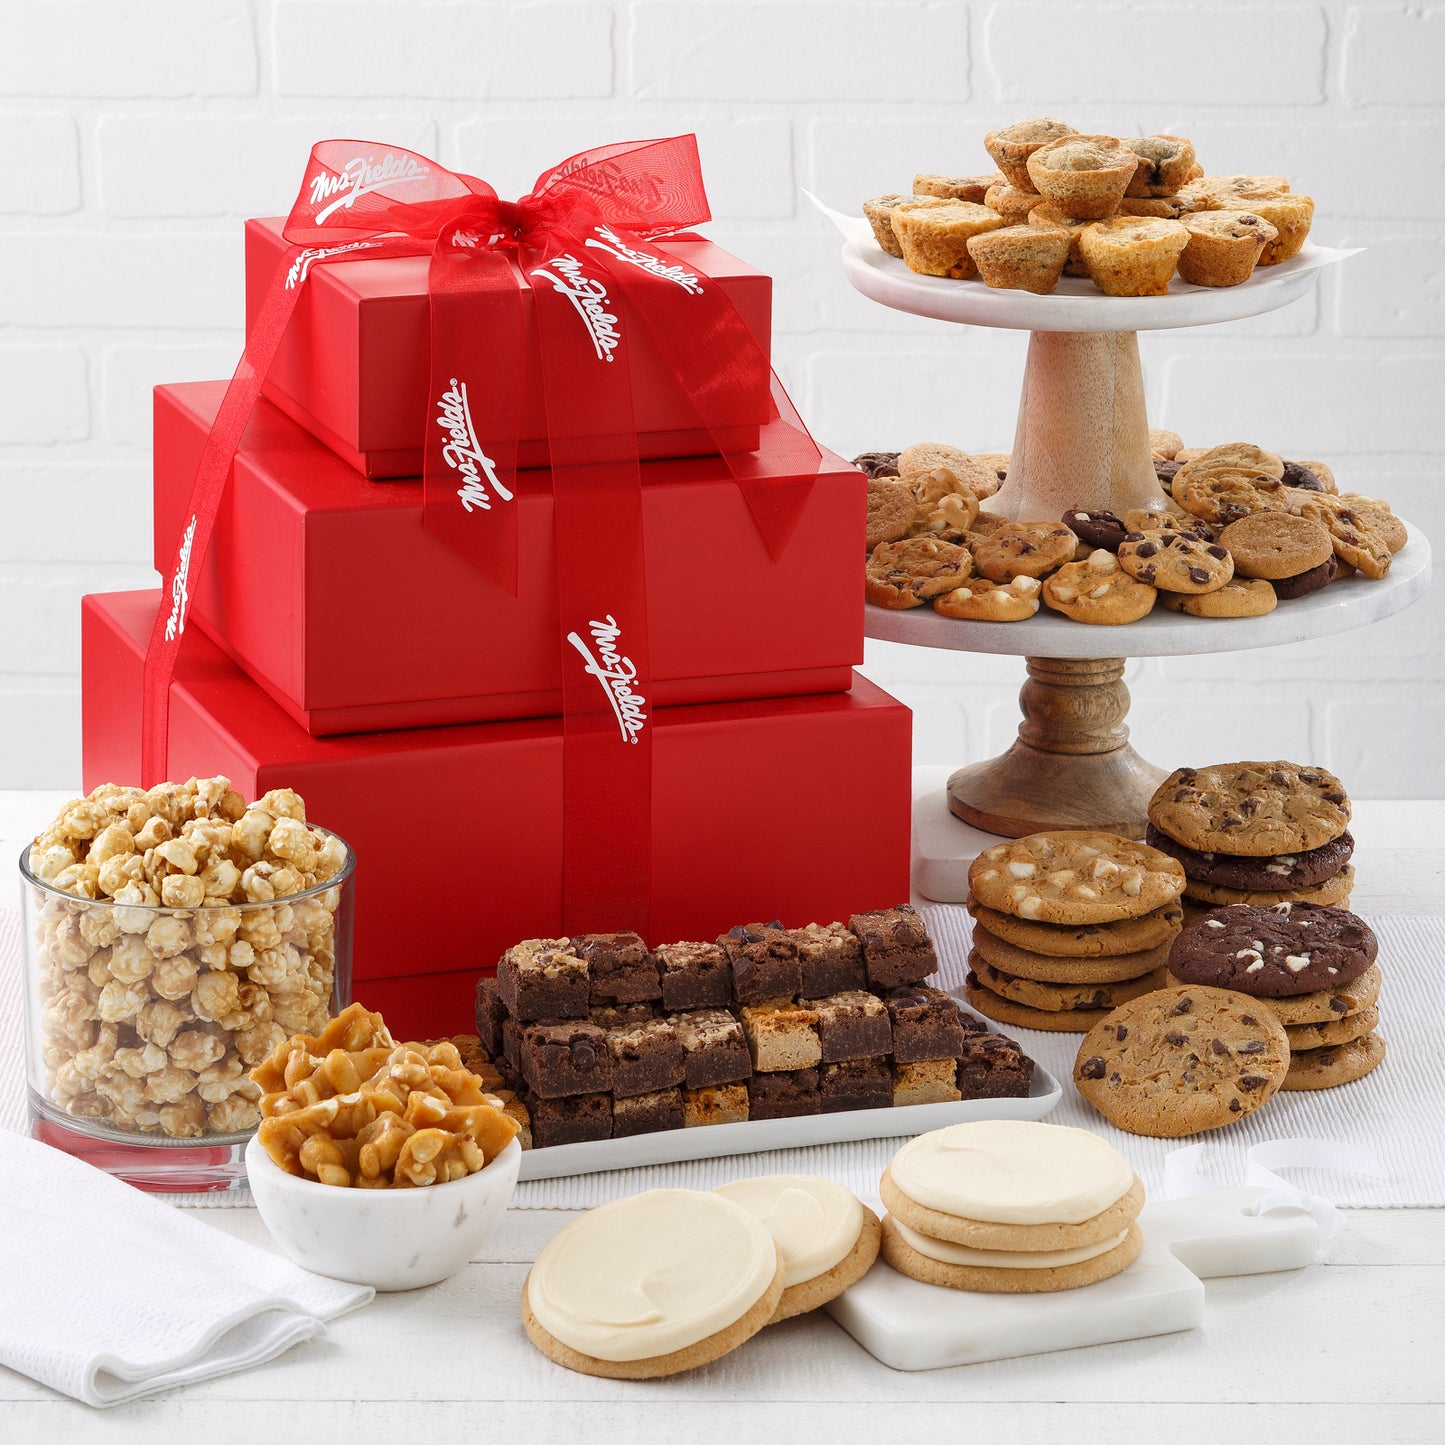 A three tier red tower tied with a Mrs. Fields ribbon and surrounded by an assortment of Nibblers®, original cookies, brownie bites, frosted cookies, popcorn, and peanut brittle